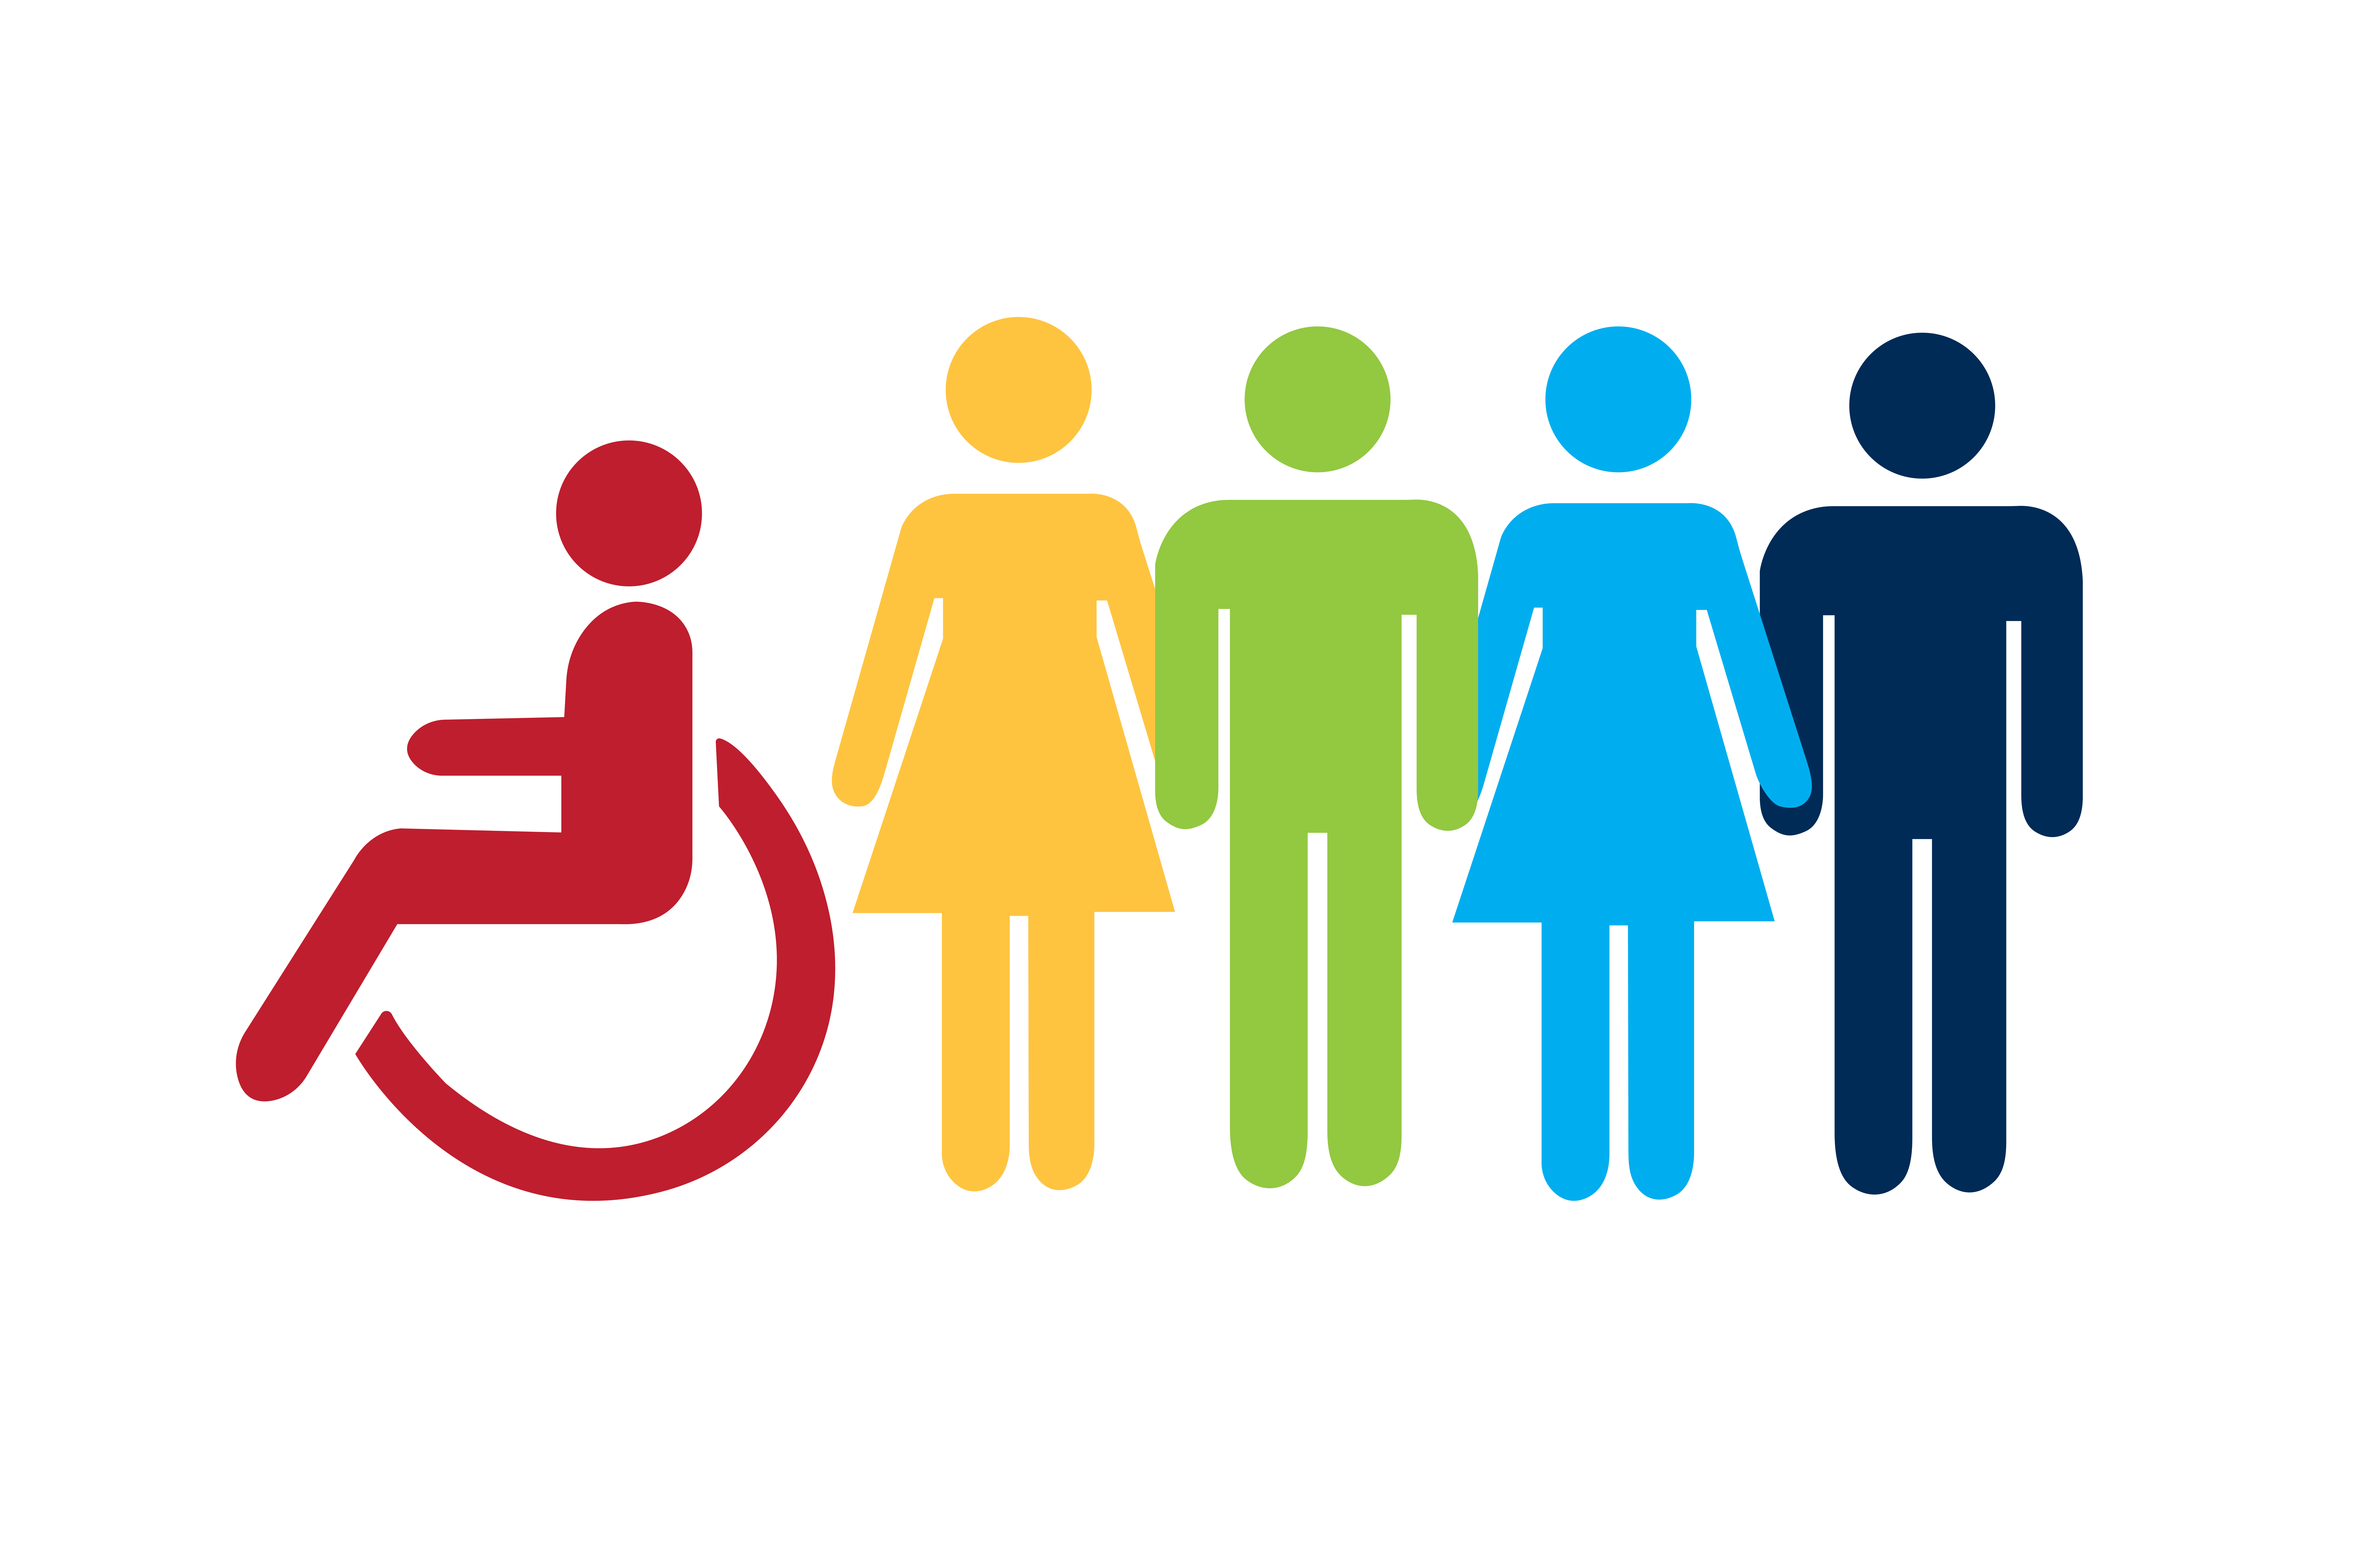 Equal Employment Opportunity graphic showing generic people in different colors and one in a wheelchair